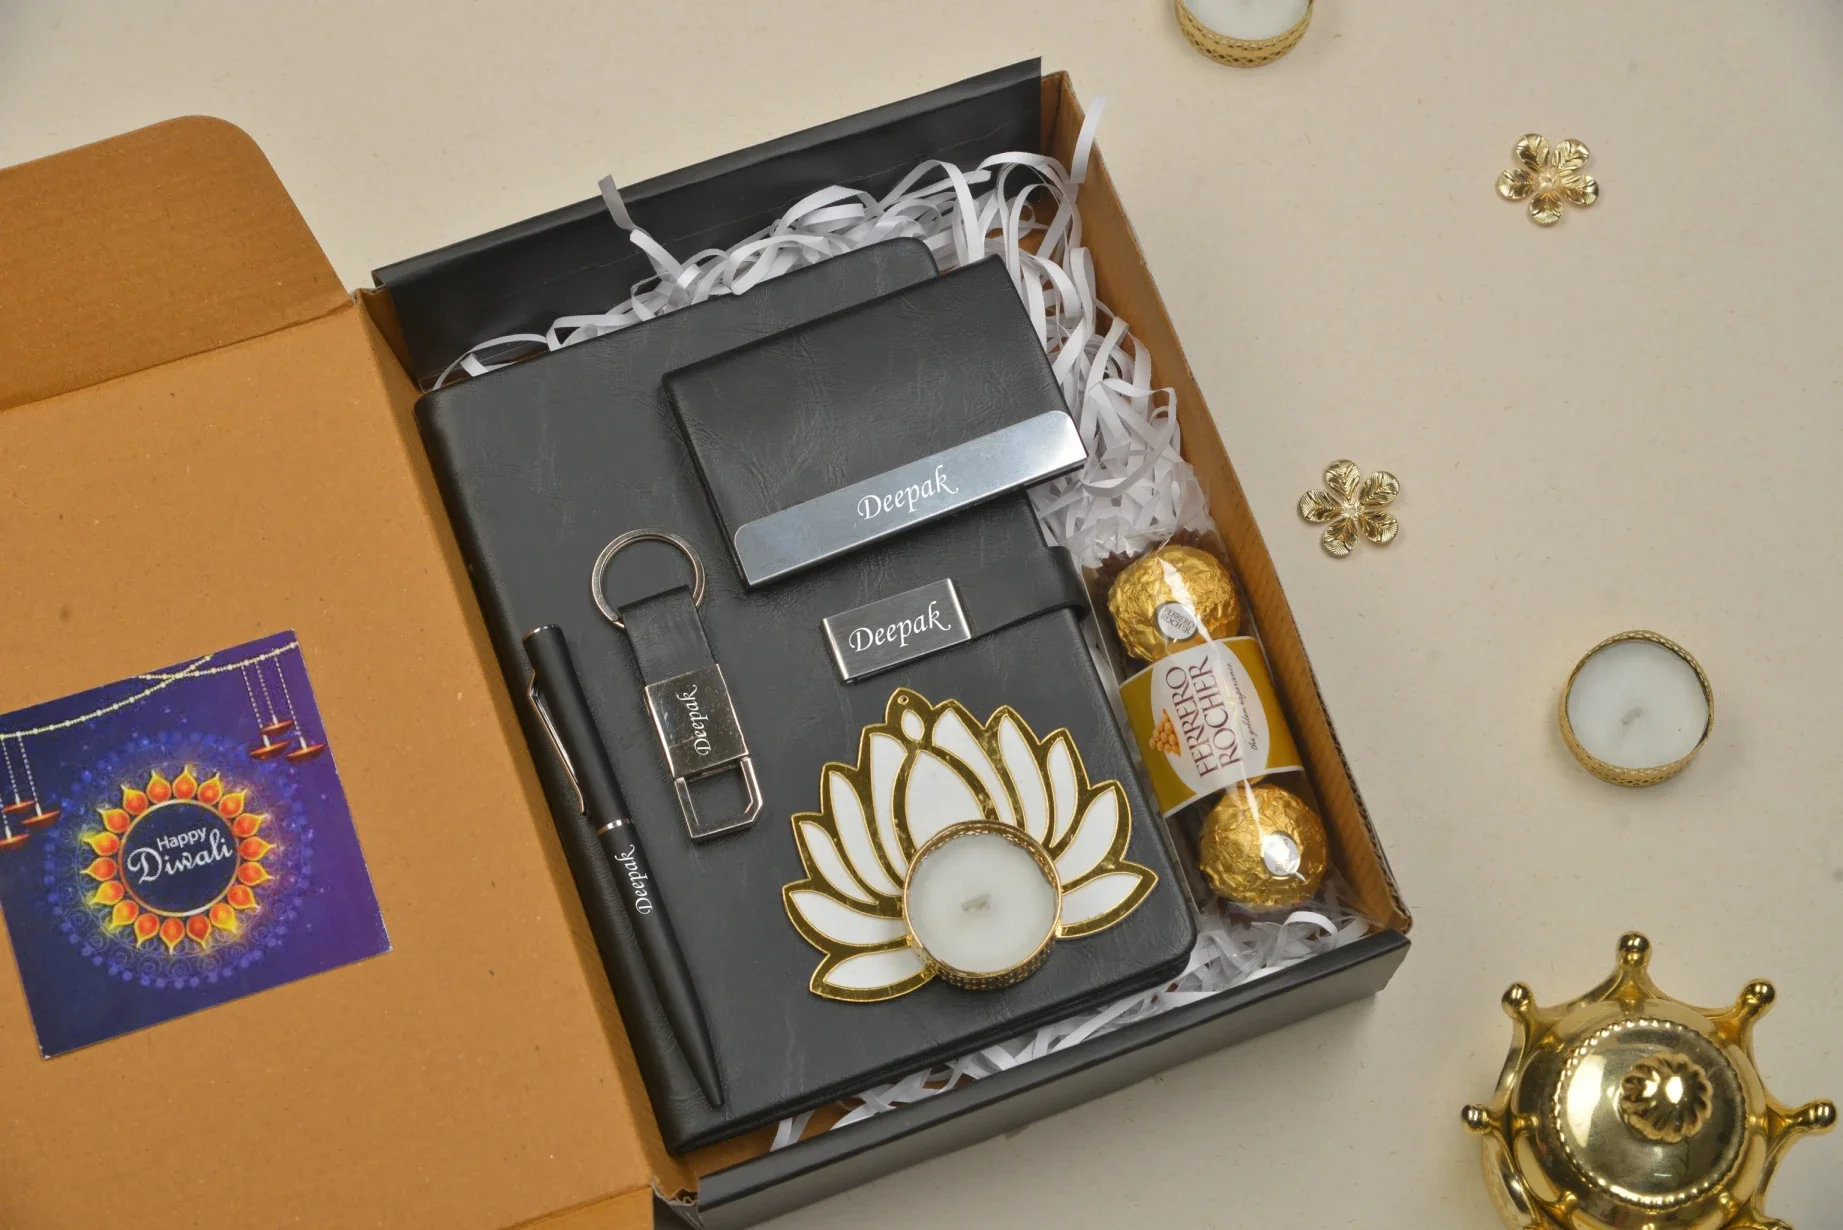 Gift the gift of organization, style, and tradition this Diwali with our Diwali combo set. This set includes a beautifully designed diary for capturing your thoughts and memories, a stylish keychain for everyday use, a traditional diya for spreading light and joy, delicious chocolates to treat your taste buds, and a high-quality pen to write it all down.